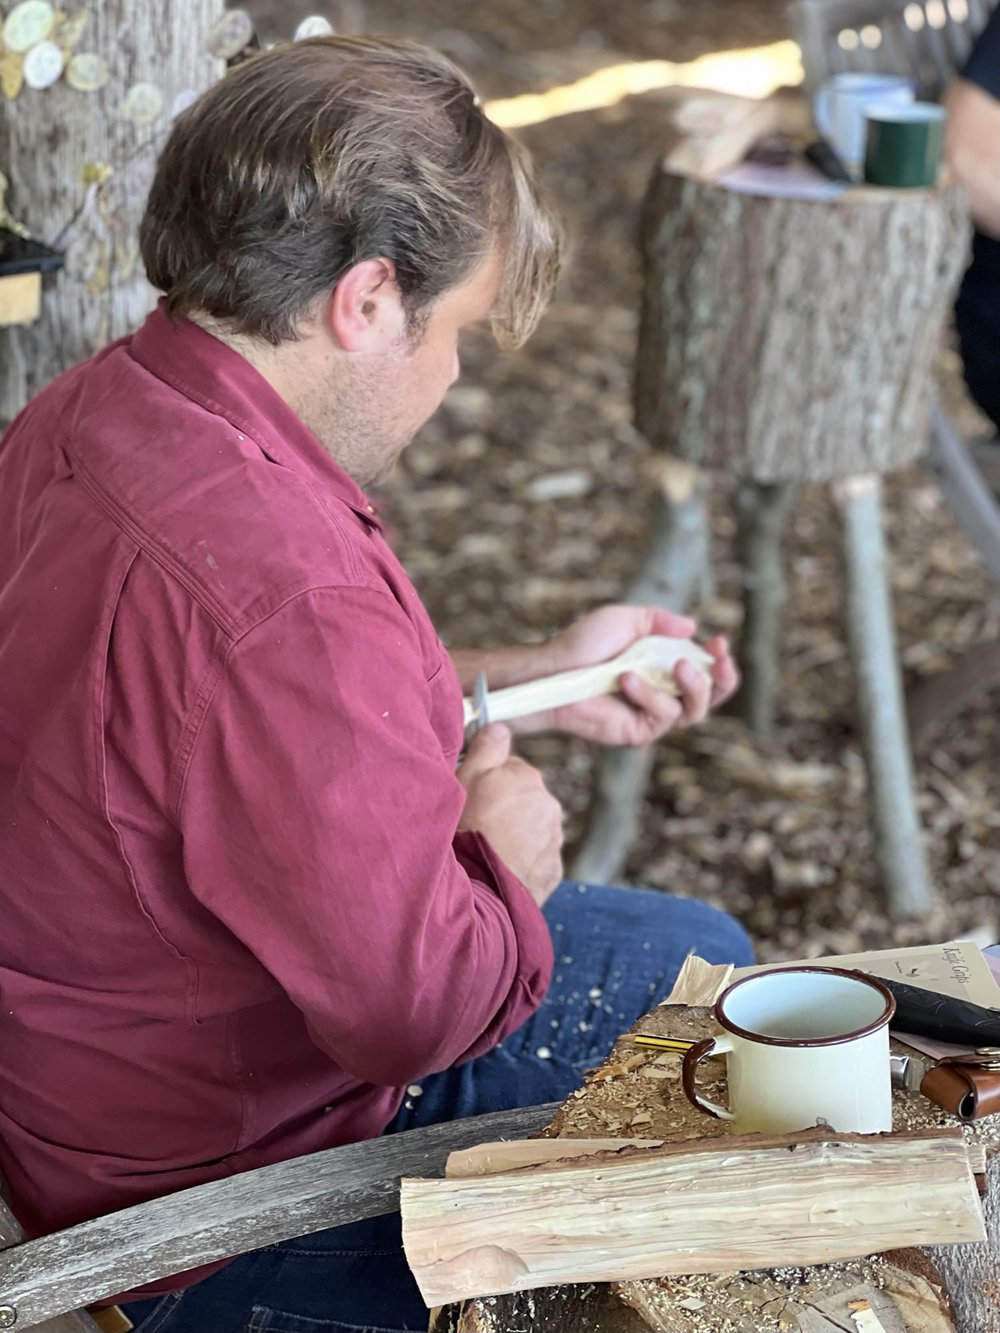 Joy-Farms-craft-woodcarving-surrey-spoon-carving-whittling.JPEG